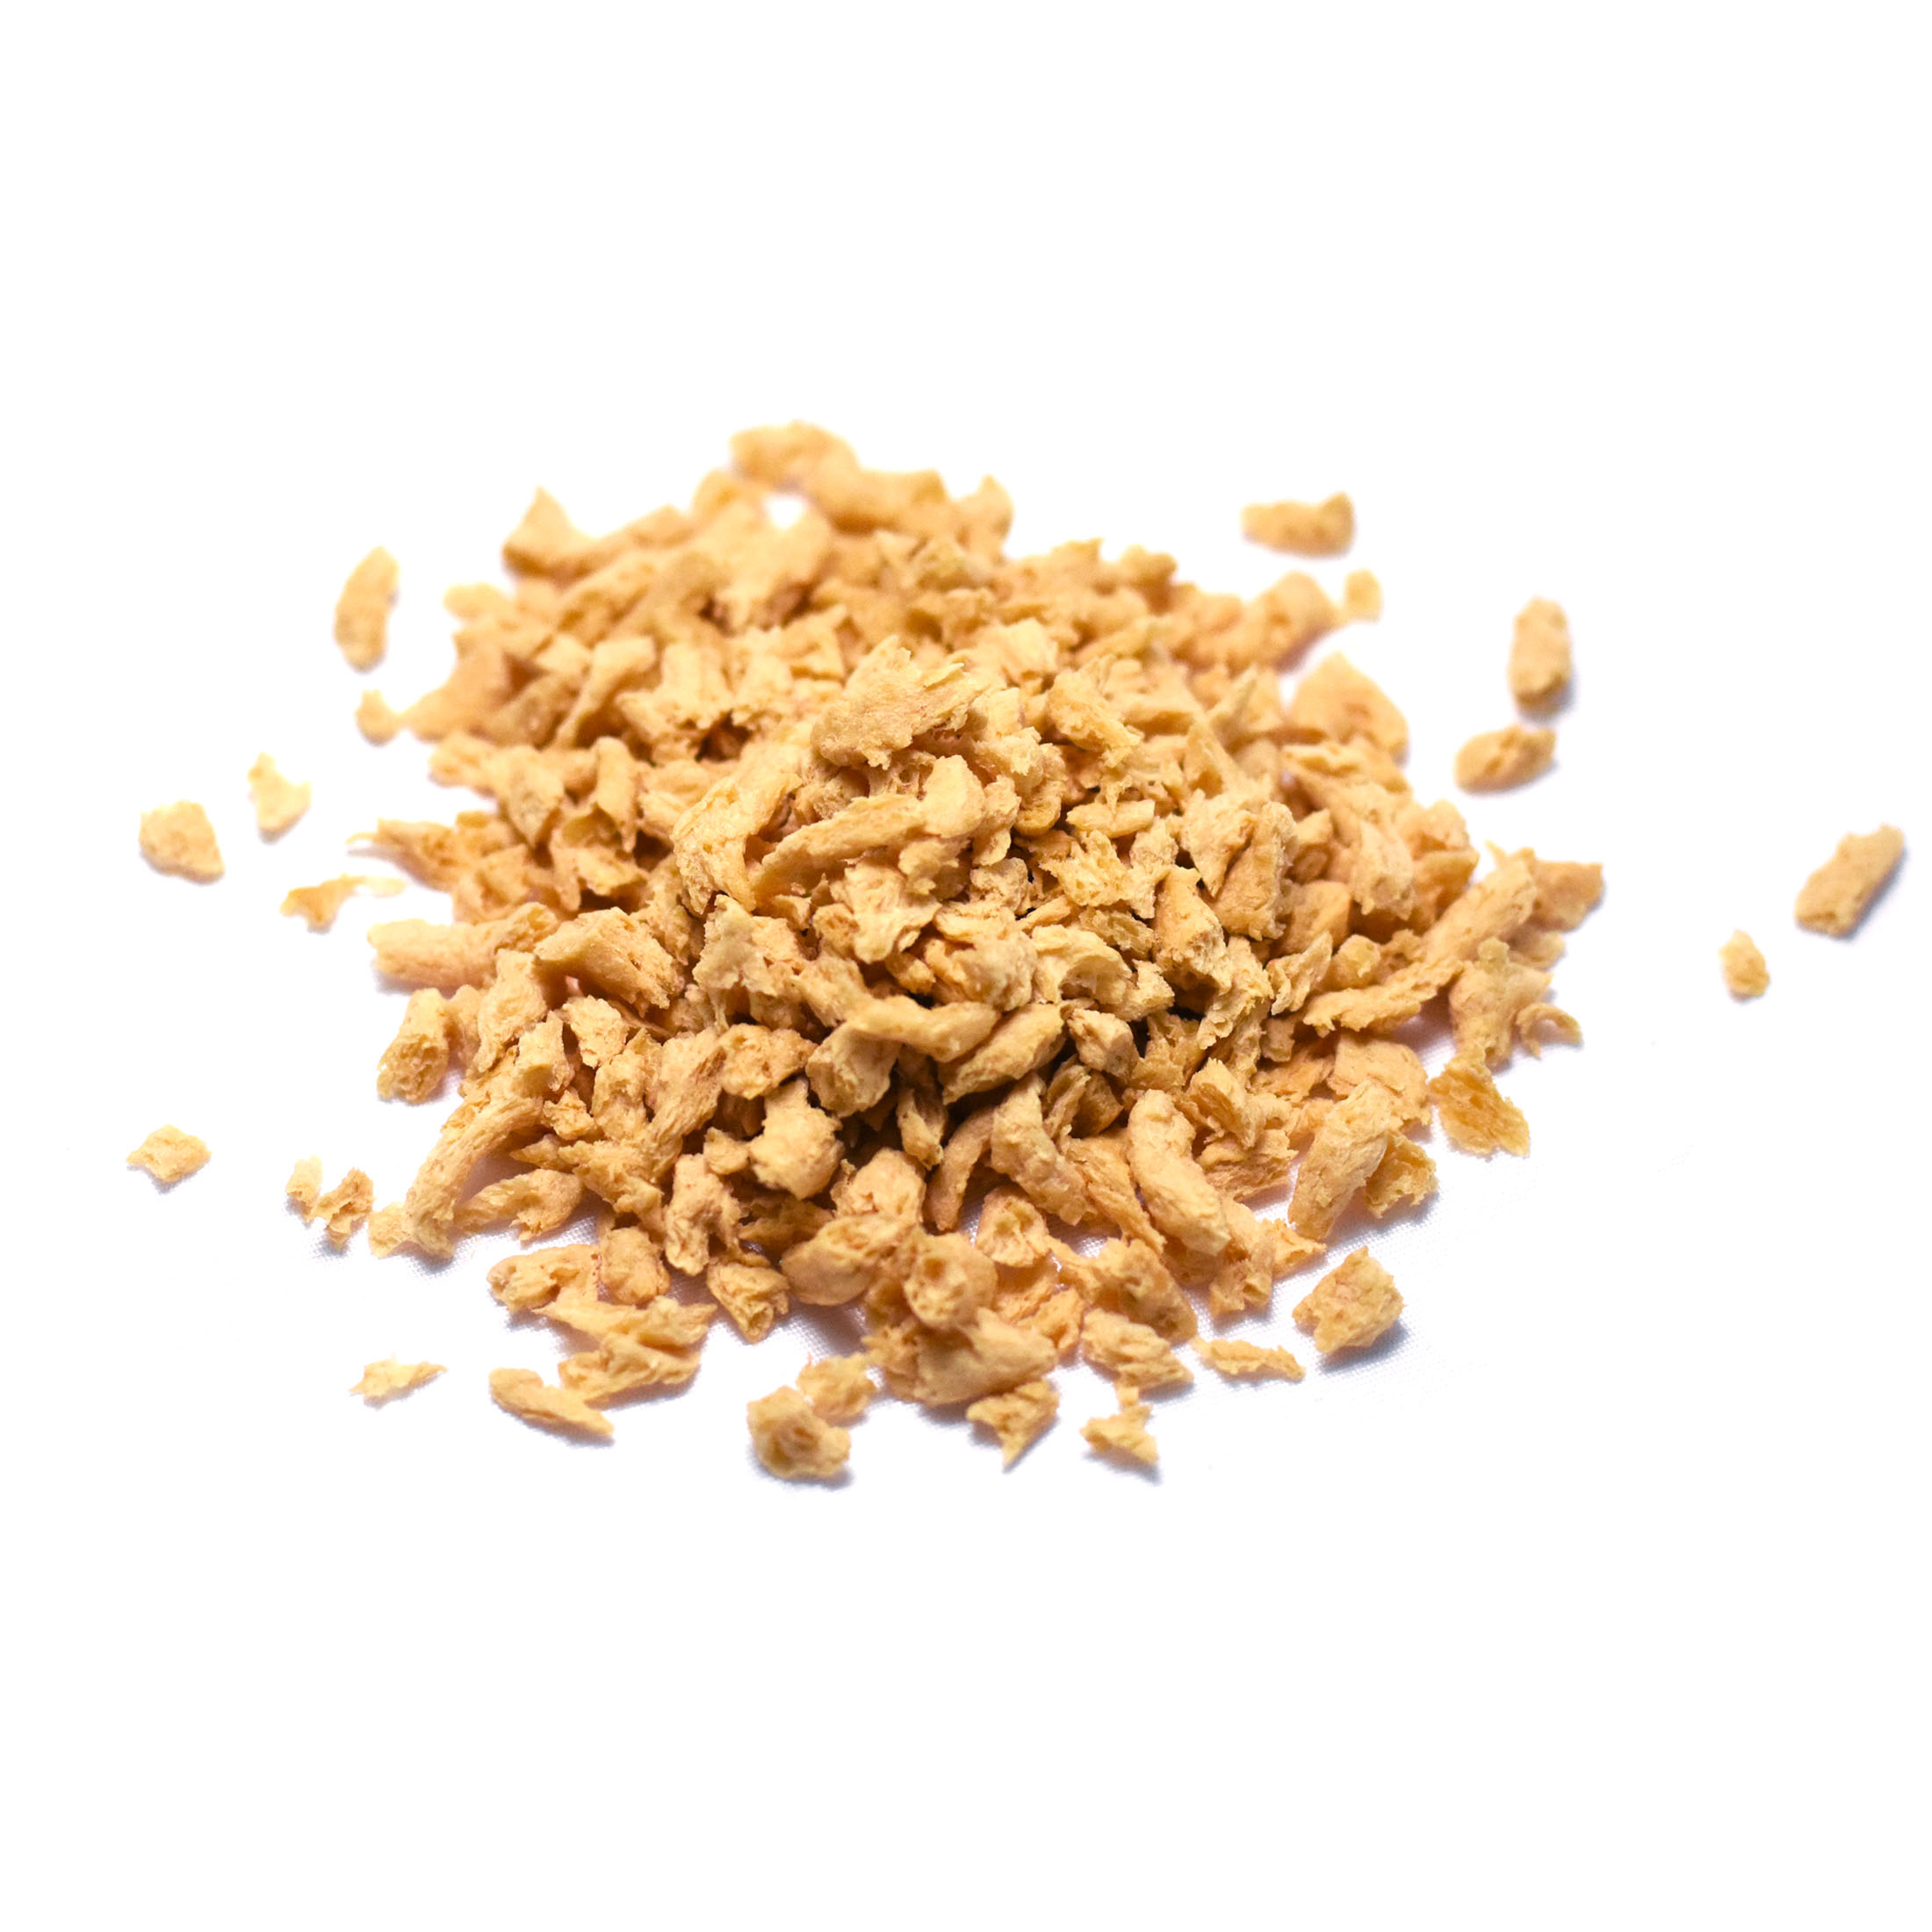 Introducing our latest product: Textured Pea Protein!